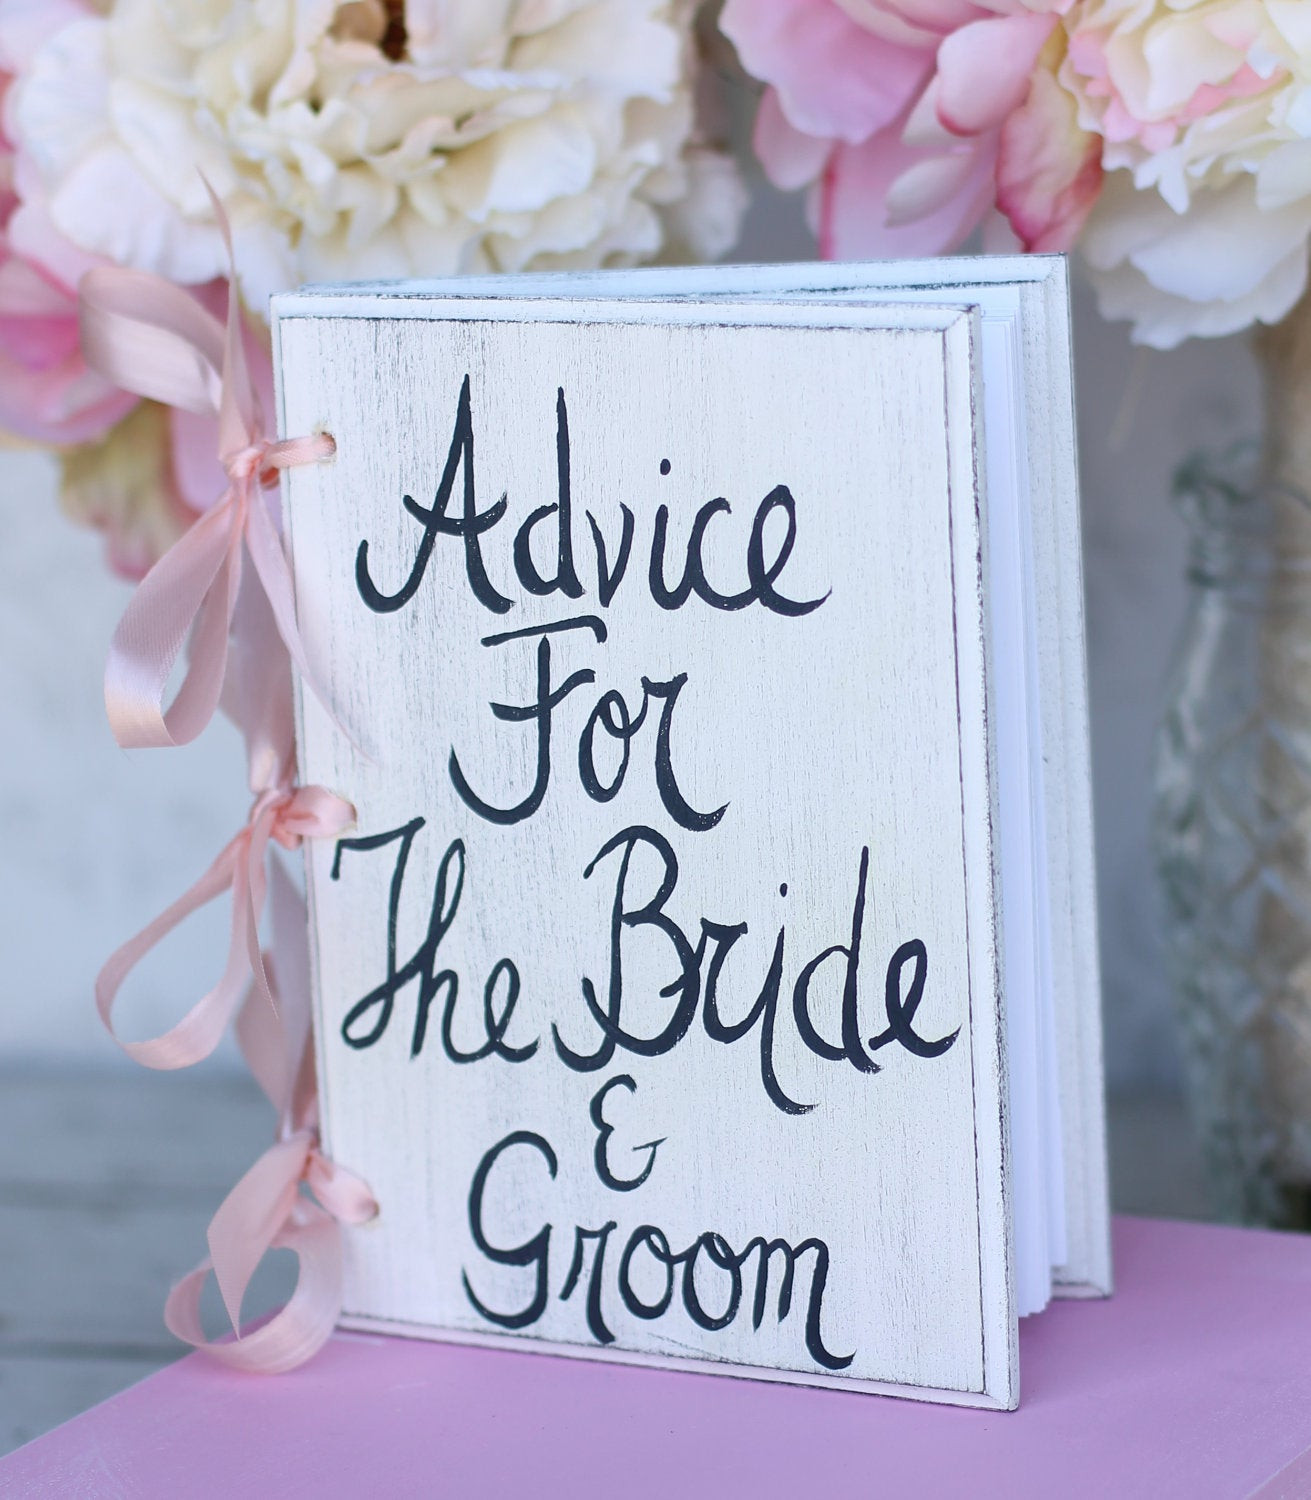 Shabby Chic Wedding Guest Book
 Wedding Guest Book Shabby Chic Decor Advice For by